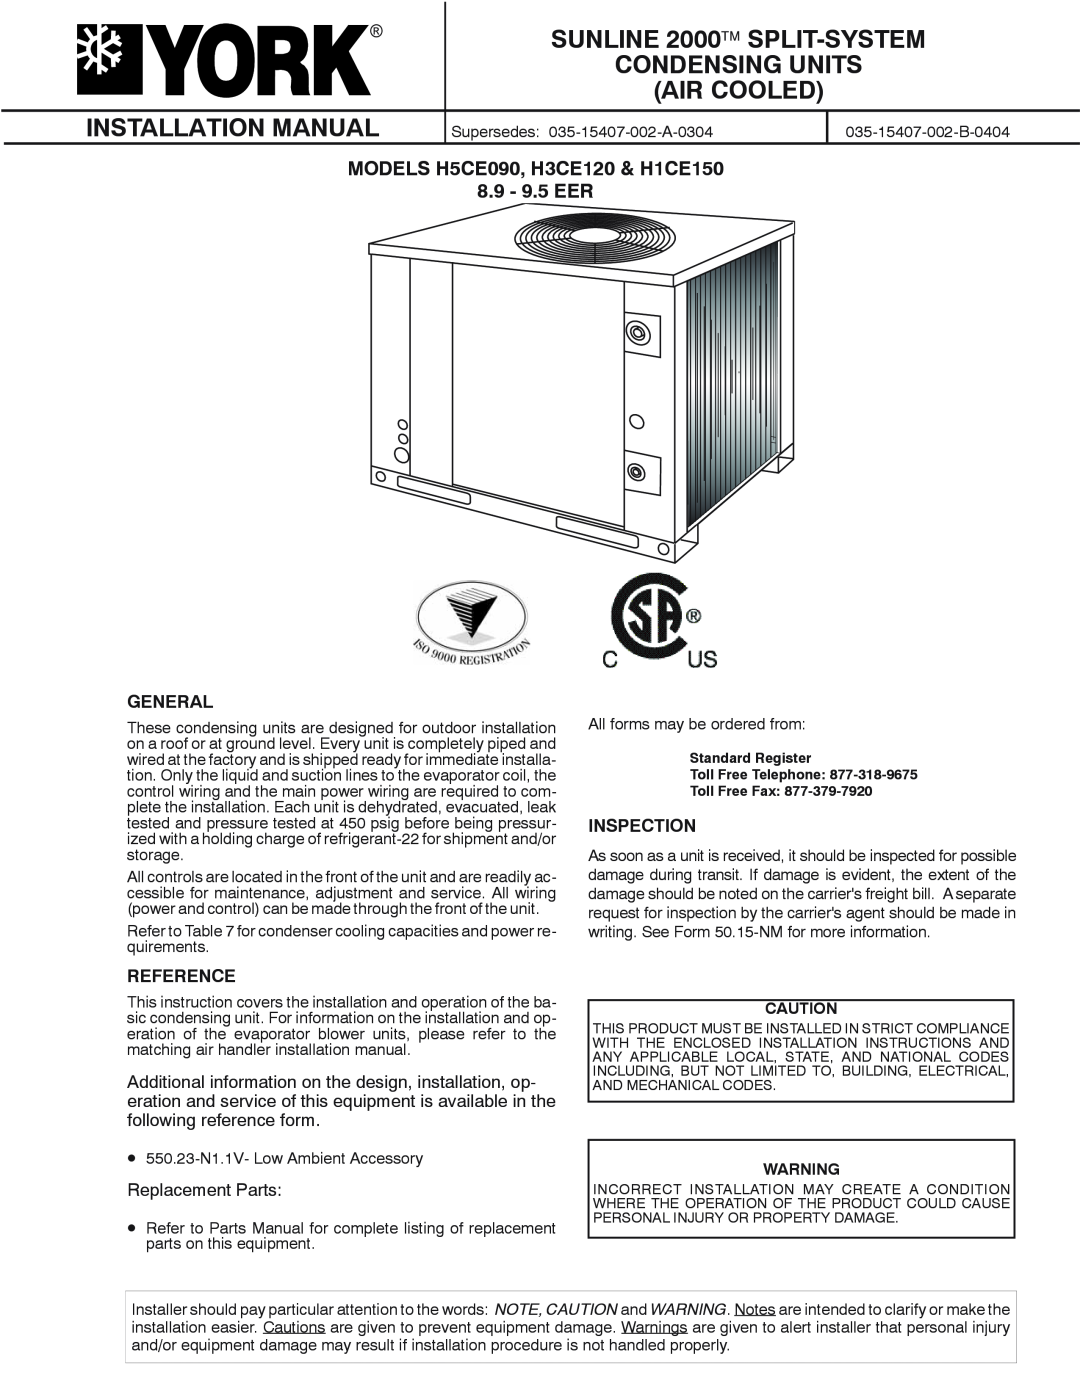 York H1CE150 installation manual Installation Manual, General, Inspection, Reference, Replacement Parts, Condensing Units 